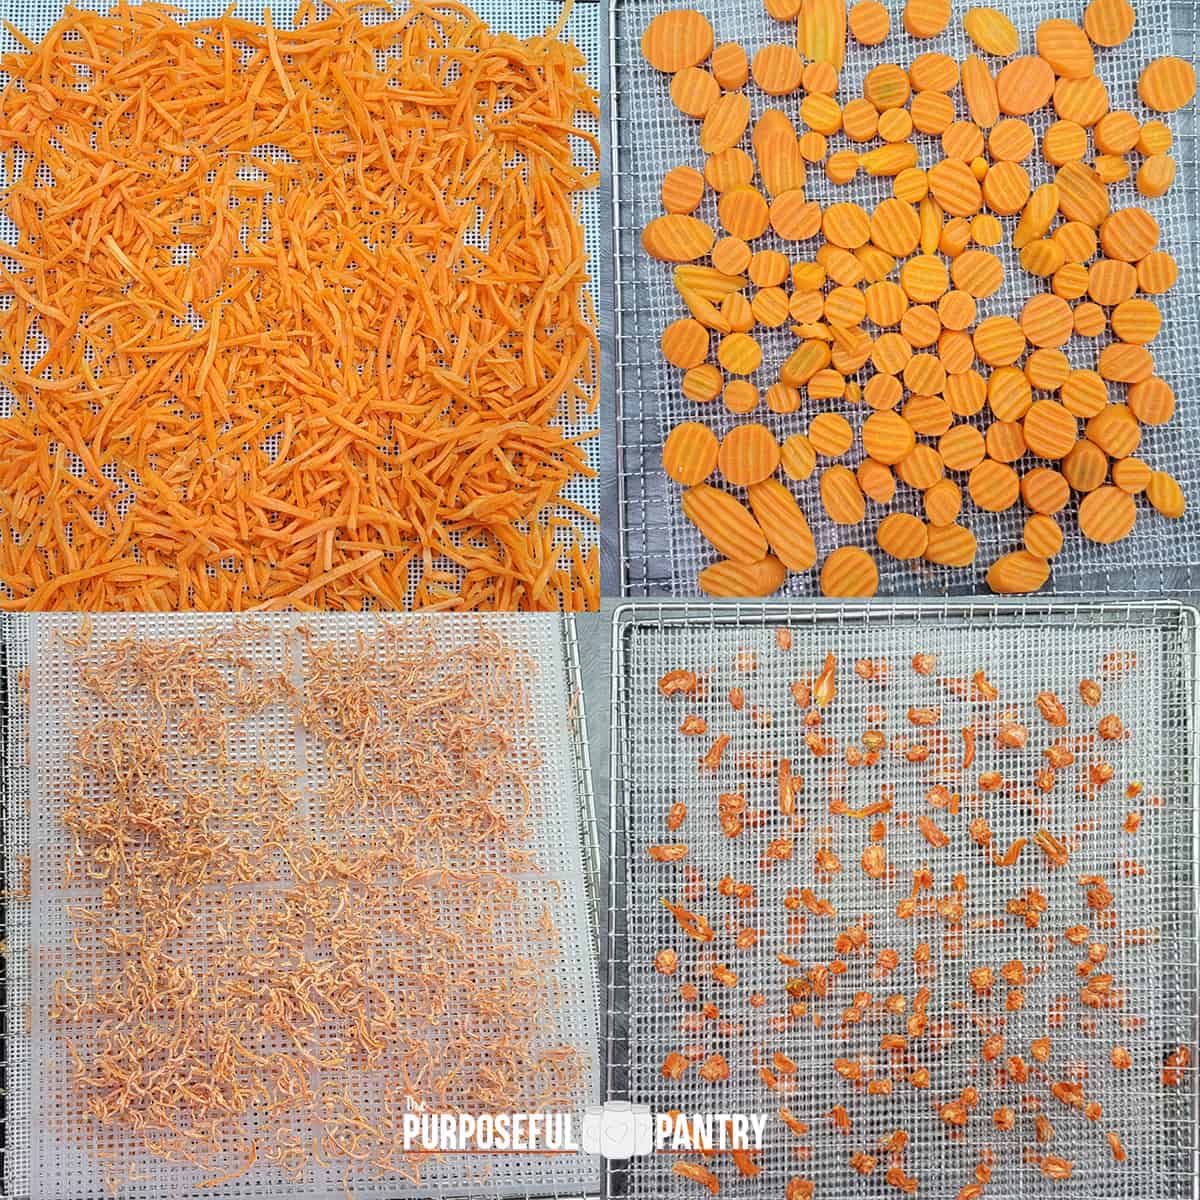 Dehydrated carrot shreds and coins before and after